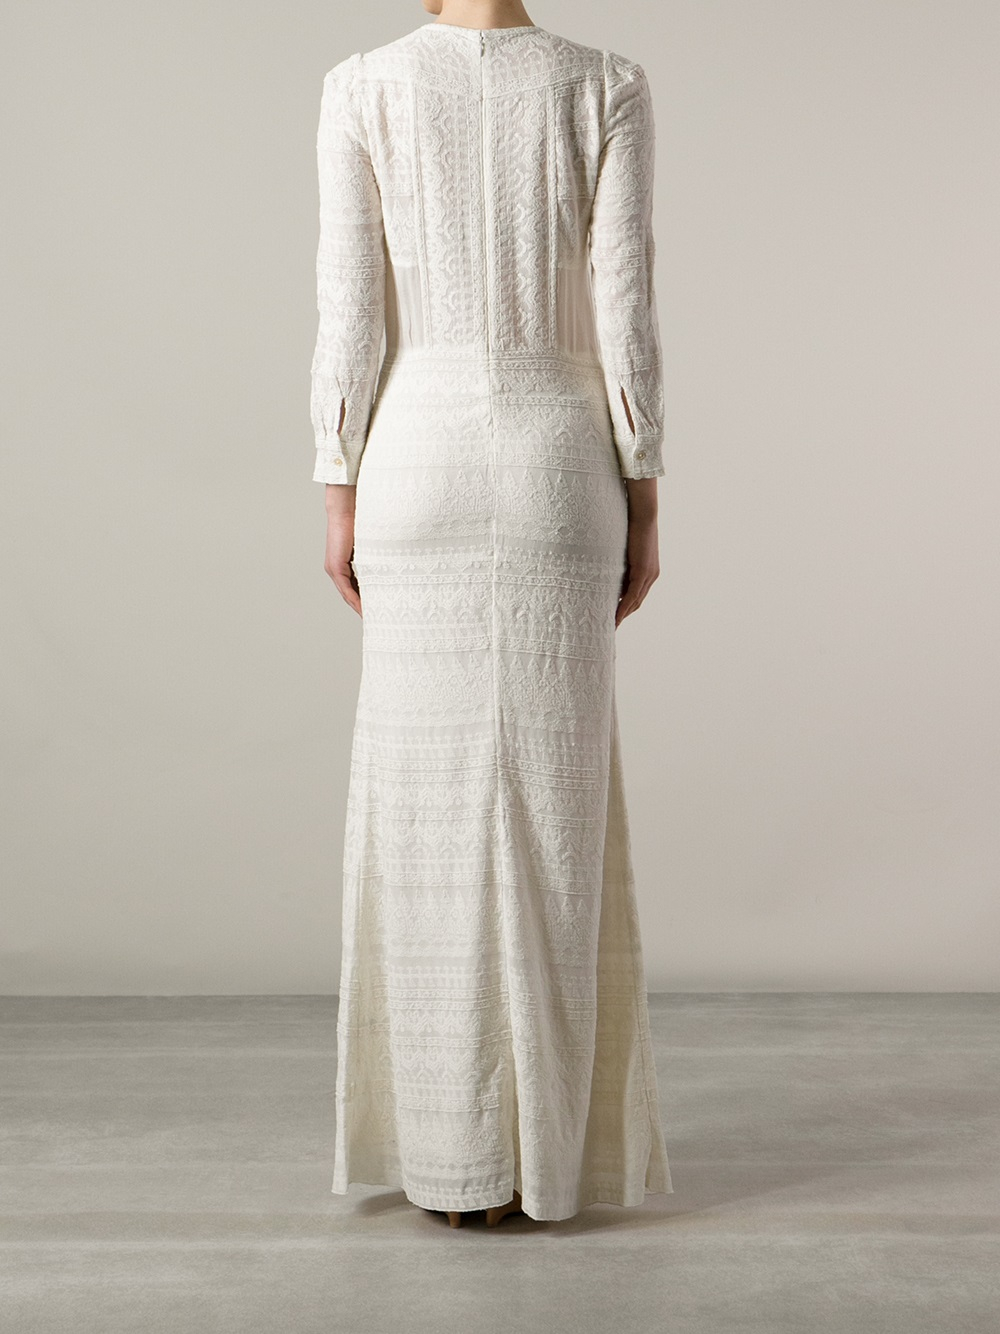 Isabel Marant Lace Dress in White - Lyst